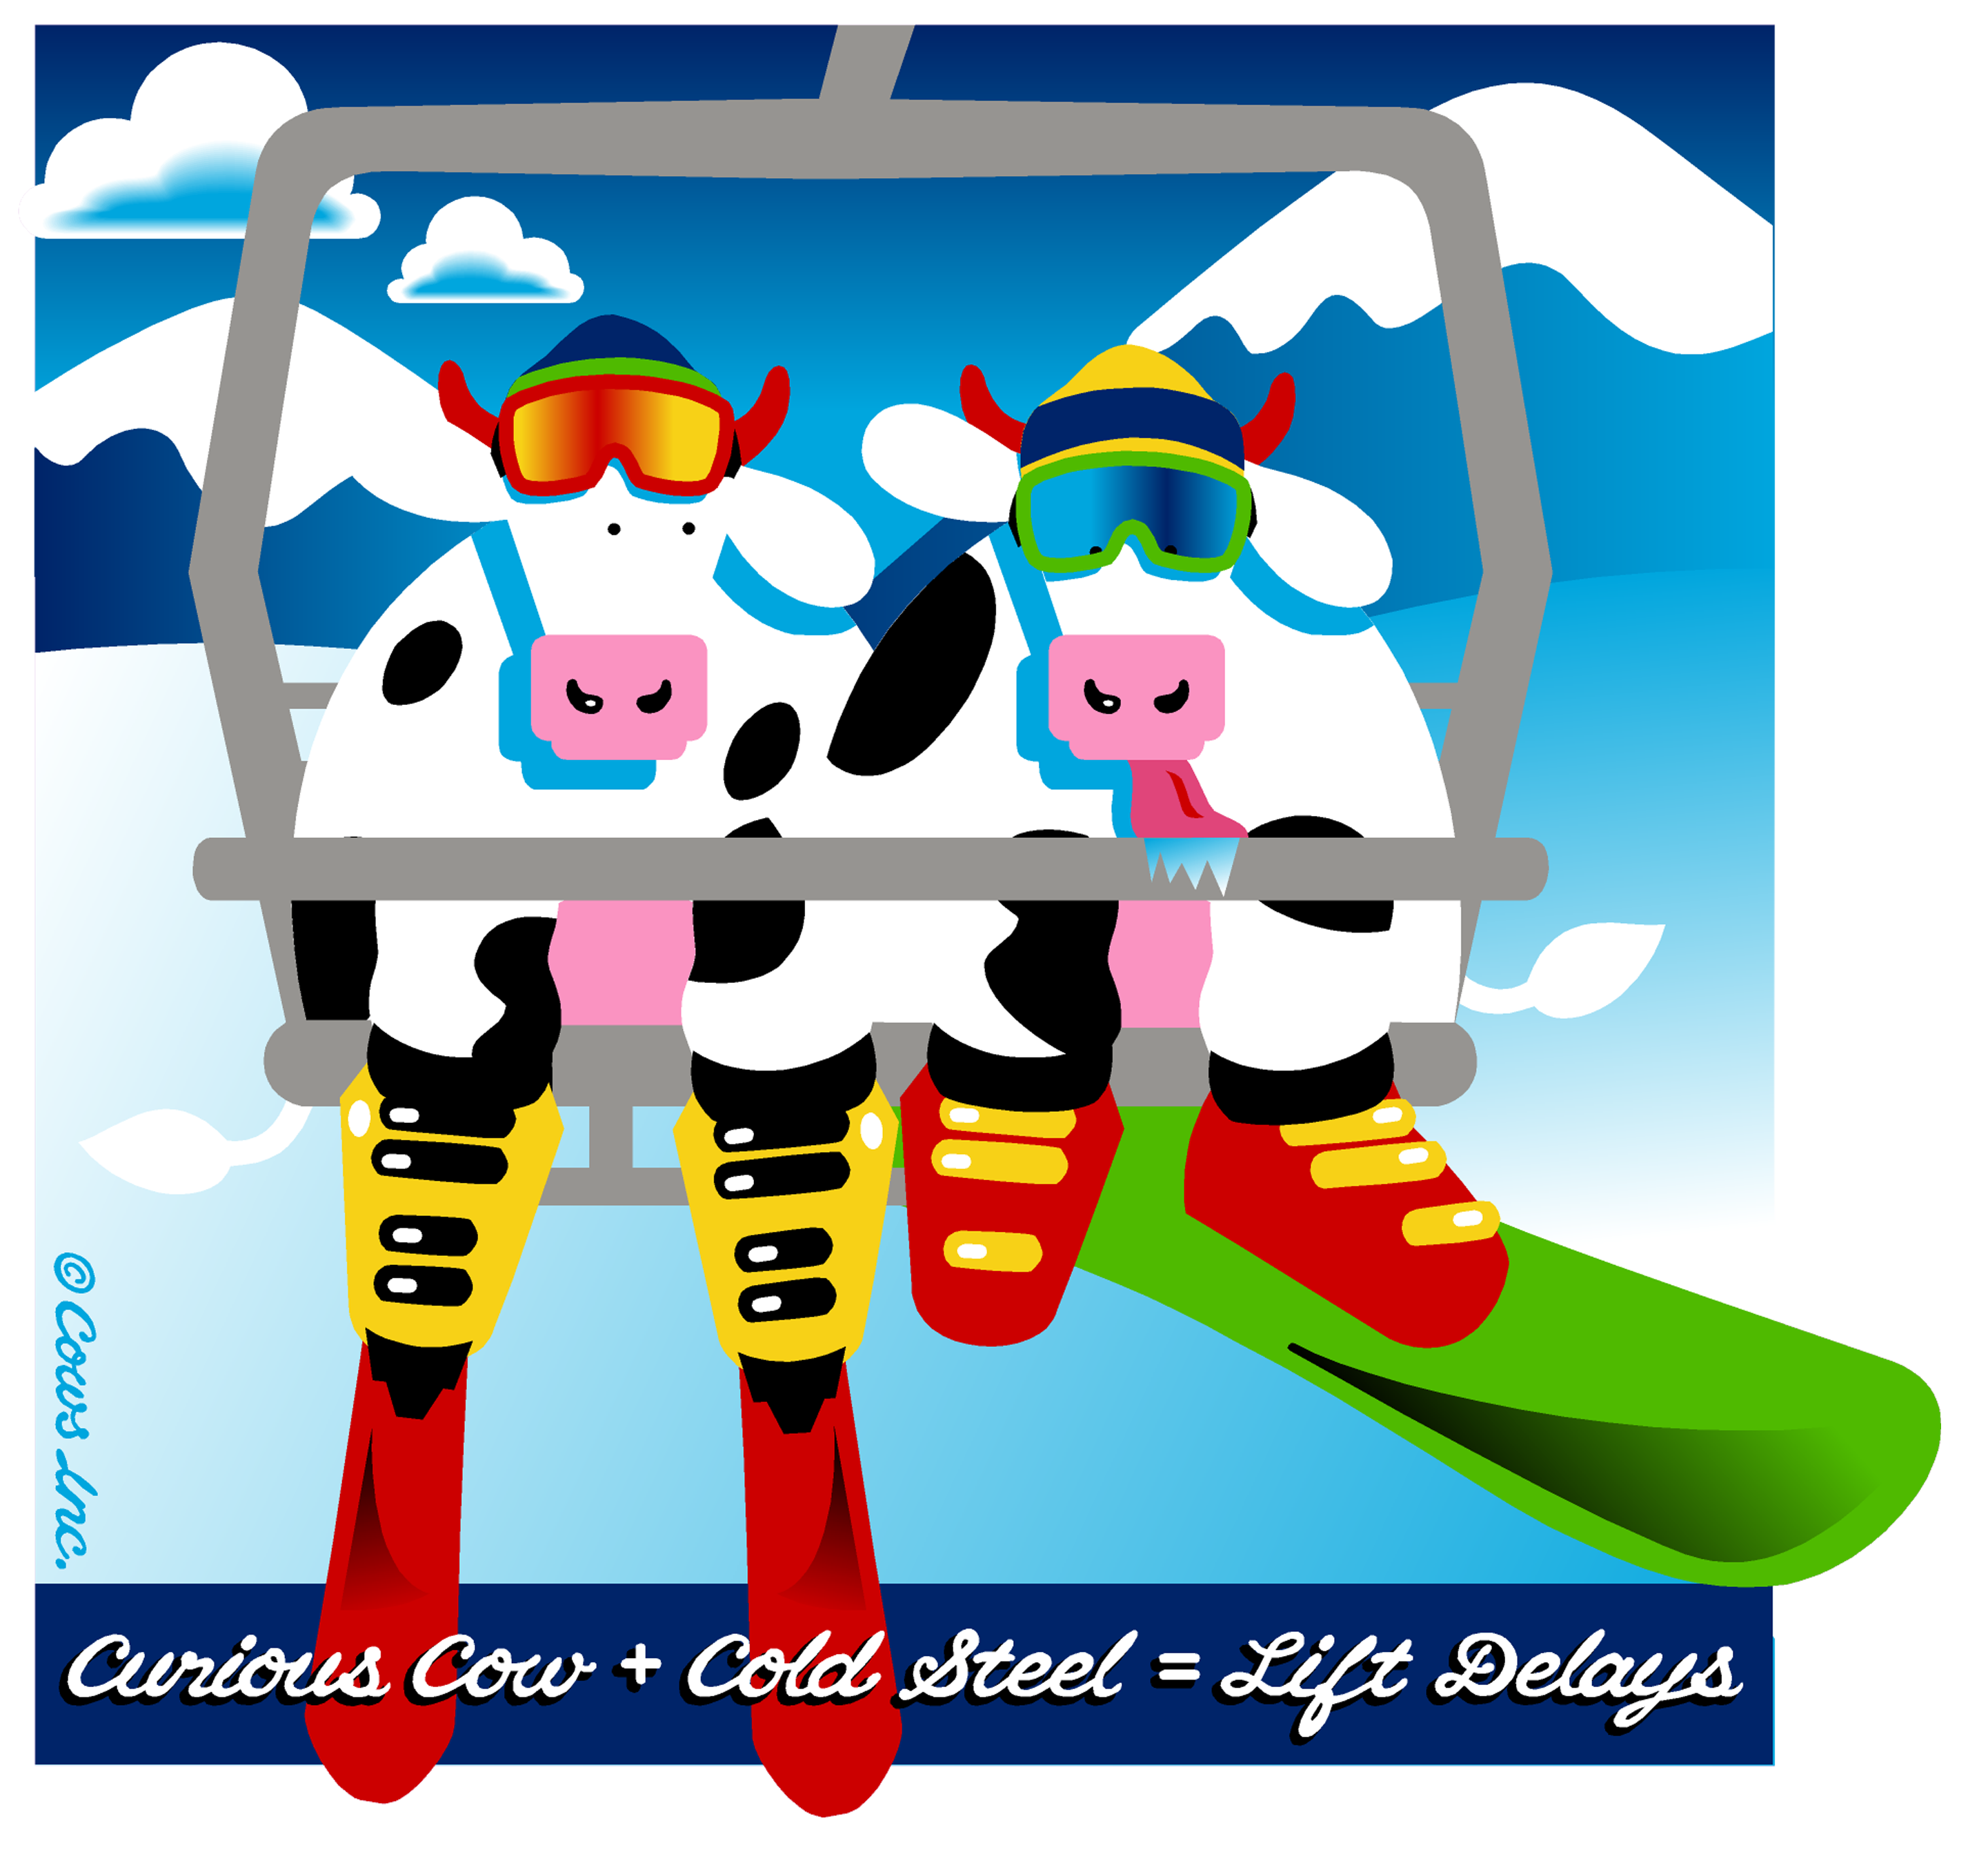 CHAIR LIFT COWS CLASSIC T